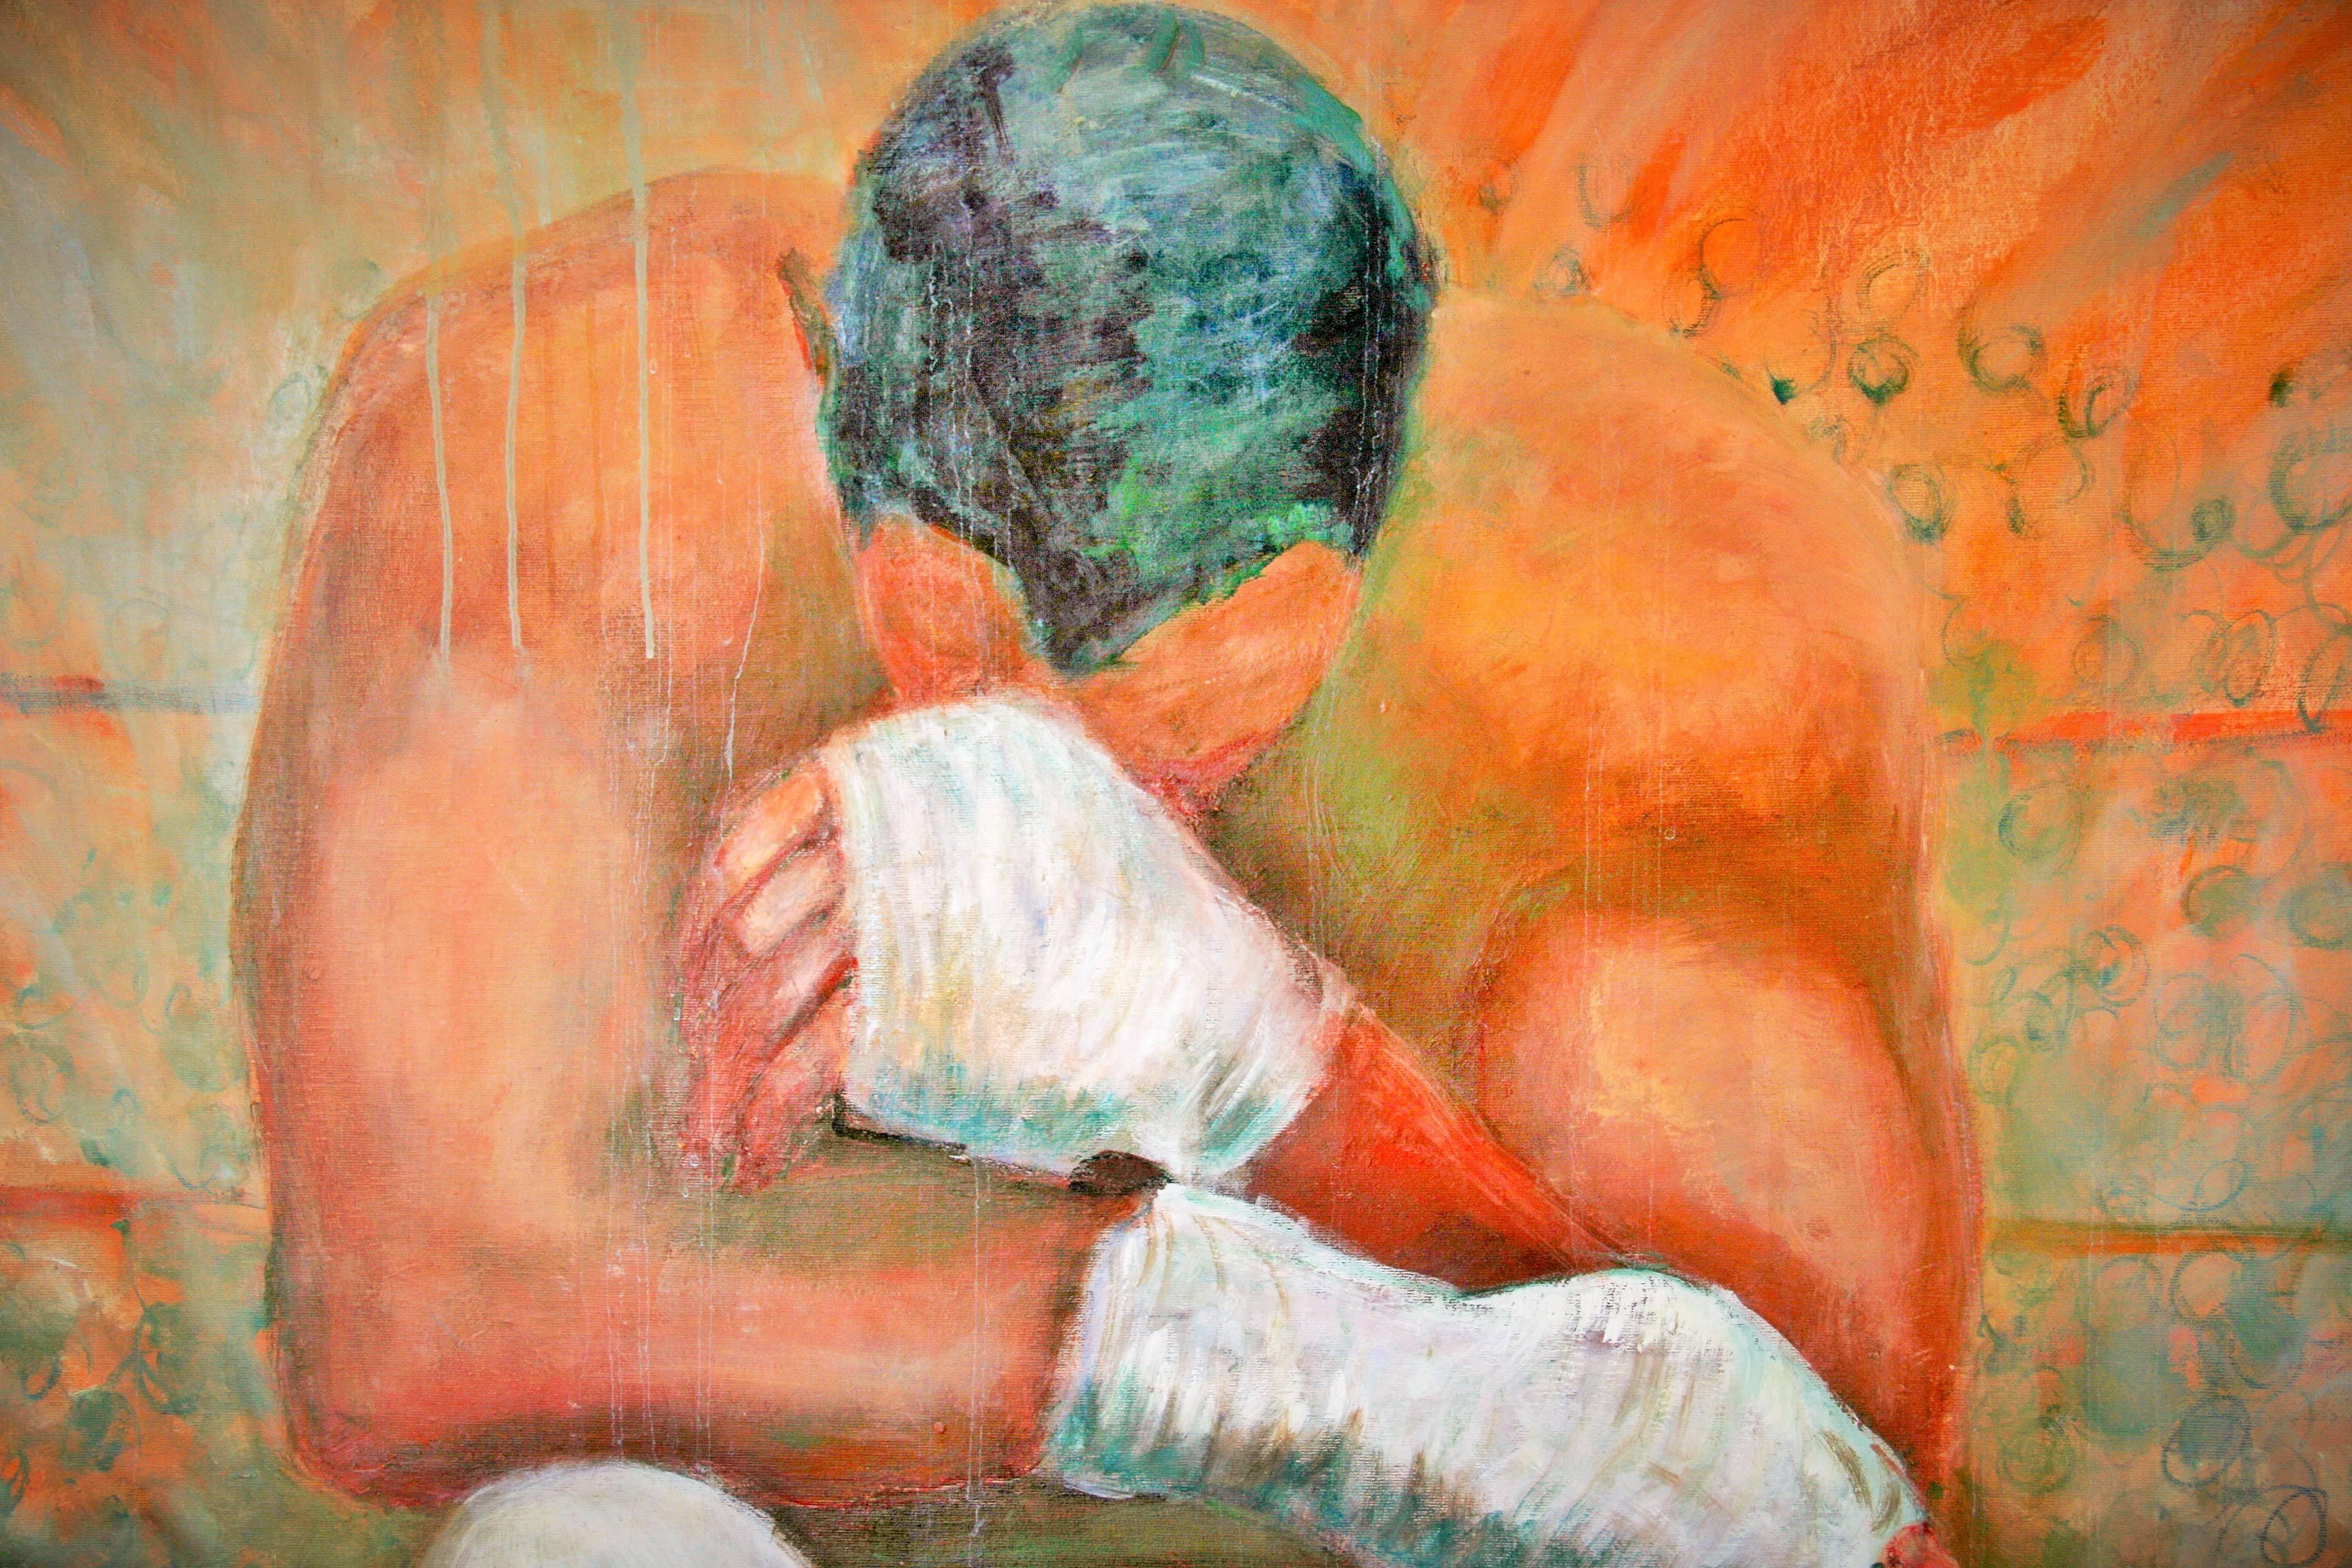    Boxer Before The Fight   - Painting by Silvana Liotti